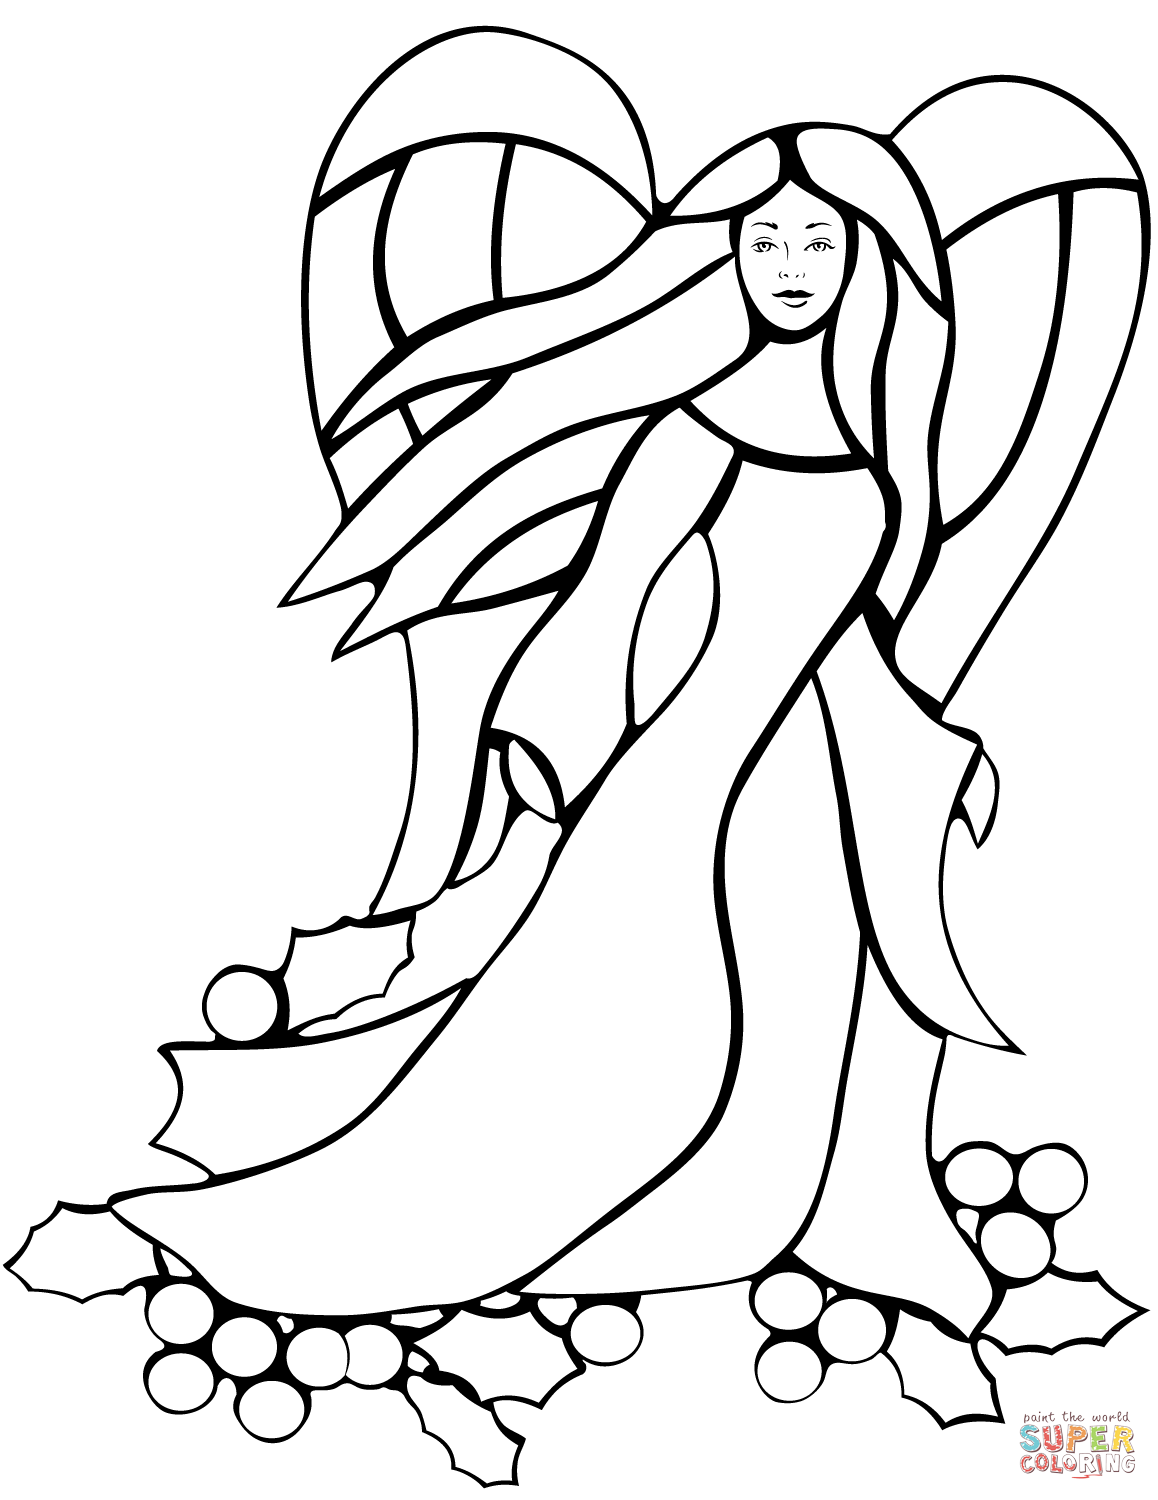 Angel stained glass coloring page free printable coloring pages